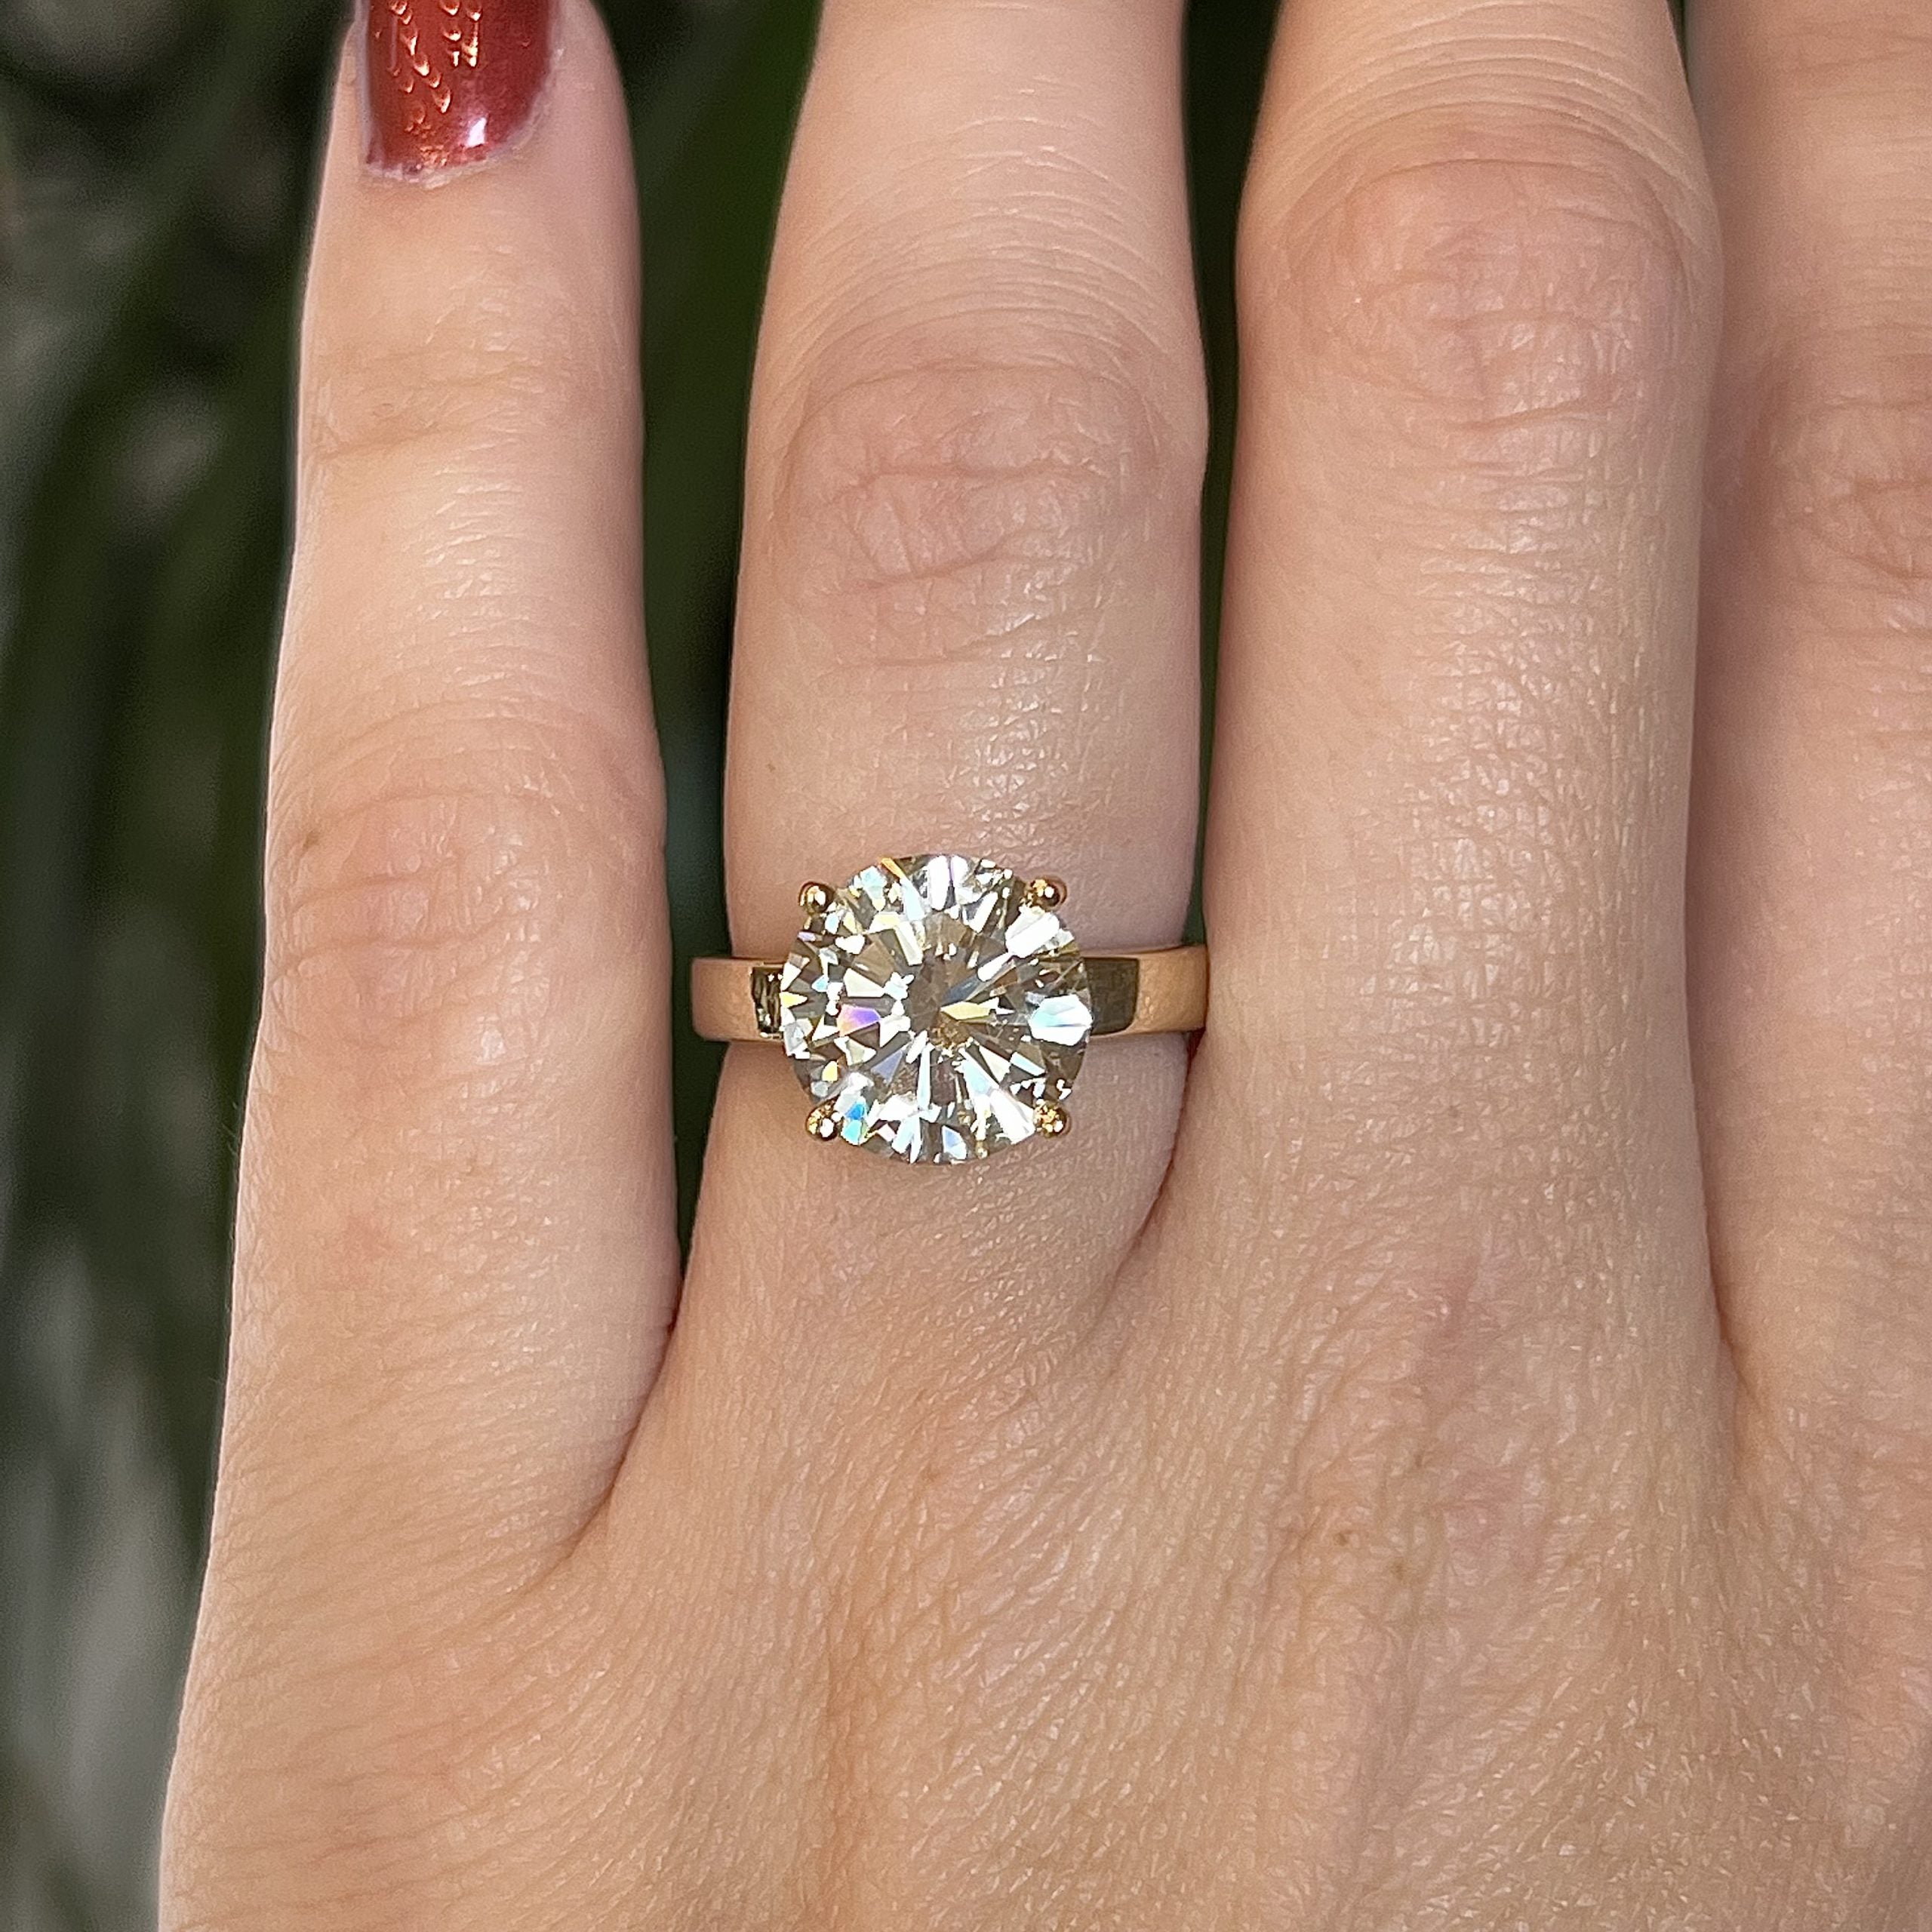 Pavé Round Solitaire Diamond Ring in Yellow, Rose or White Gold